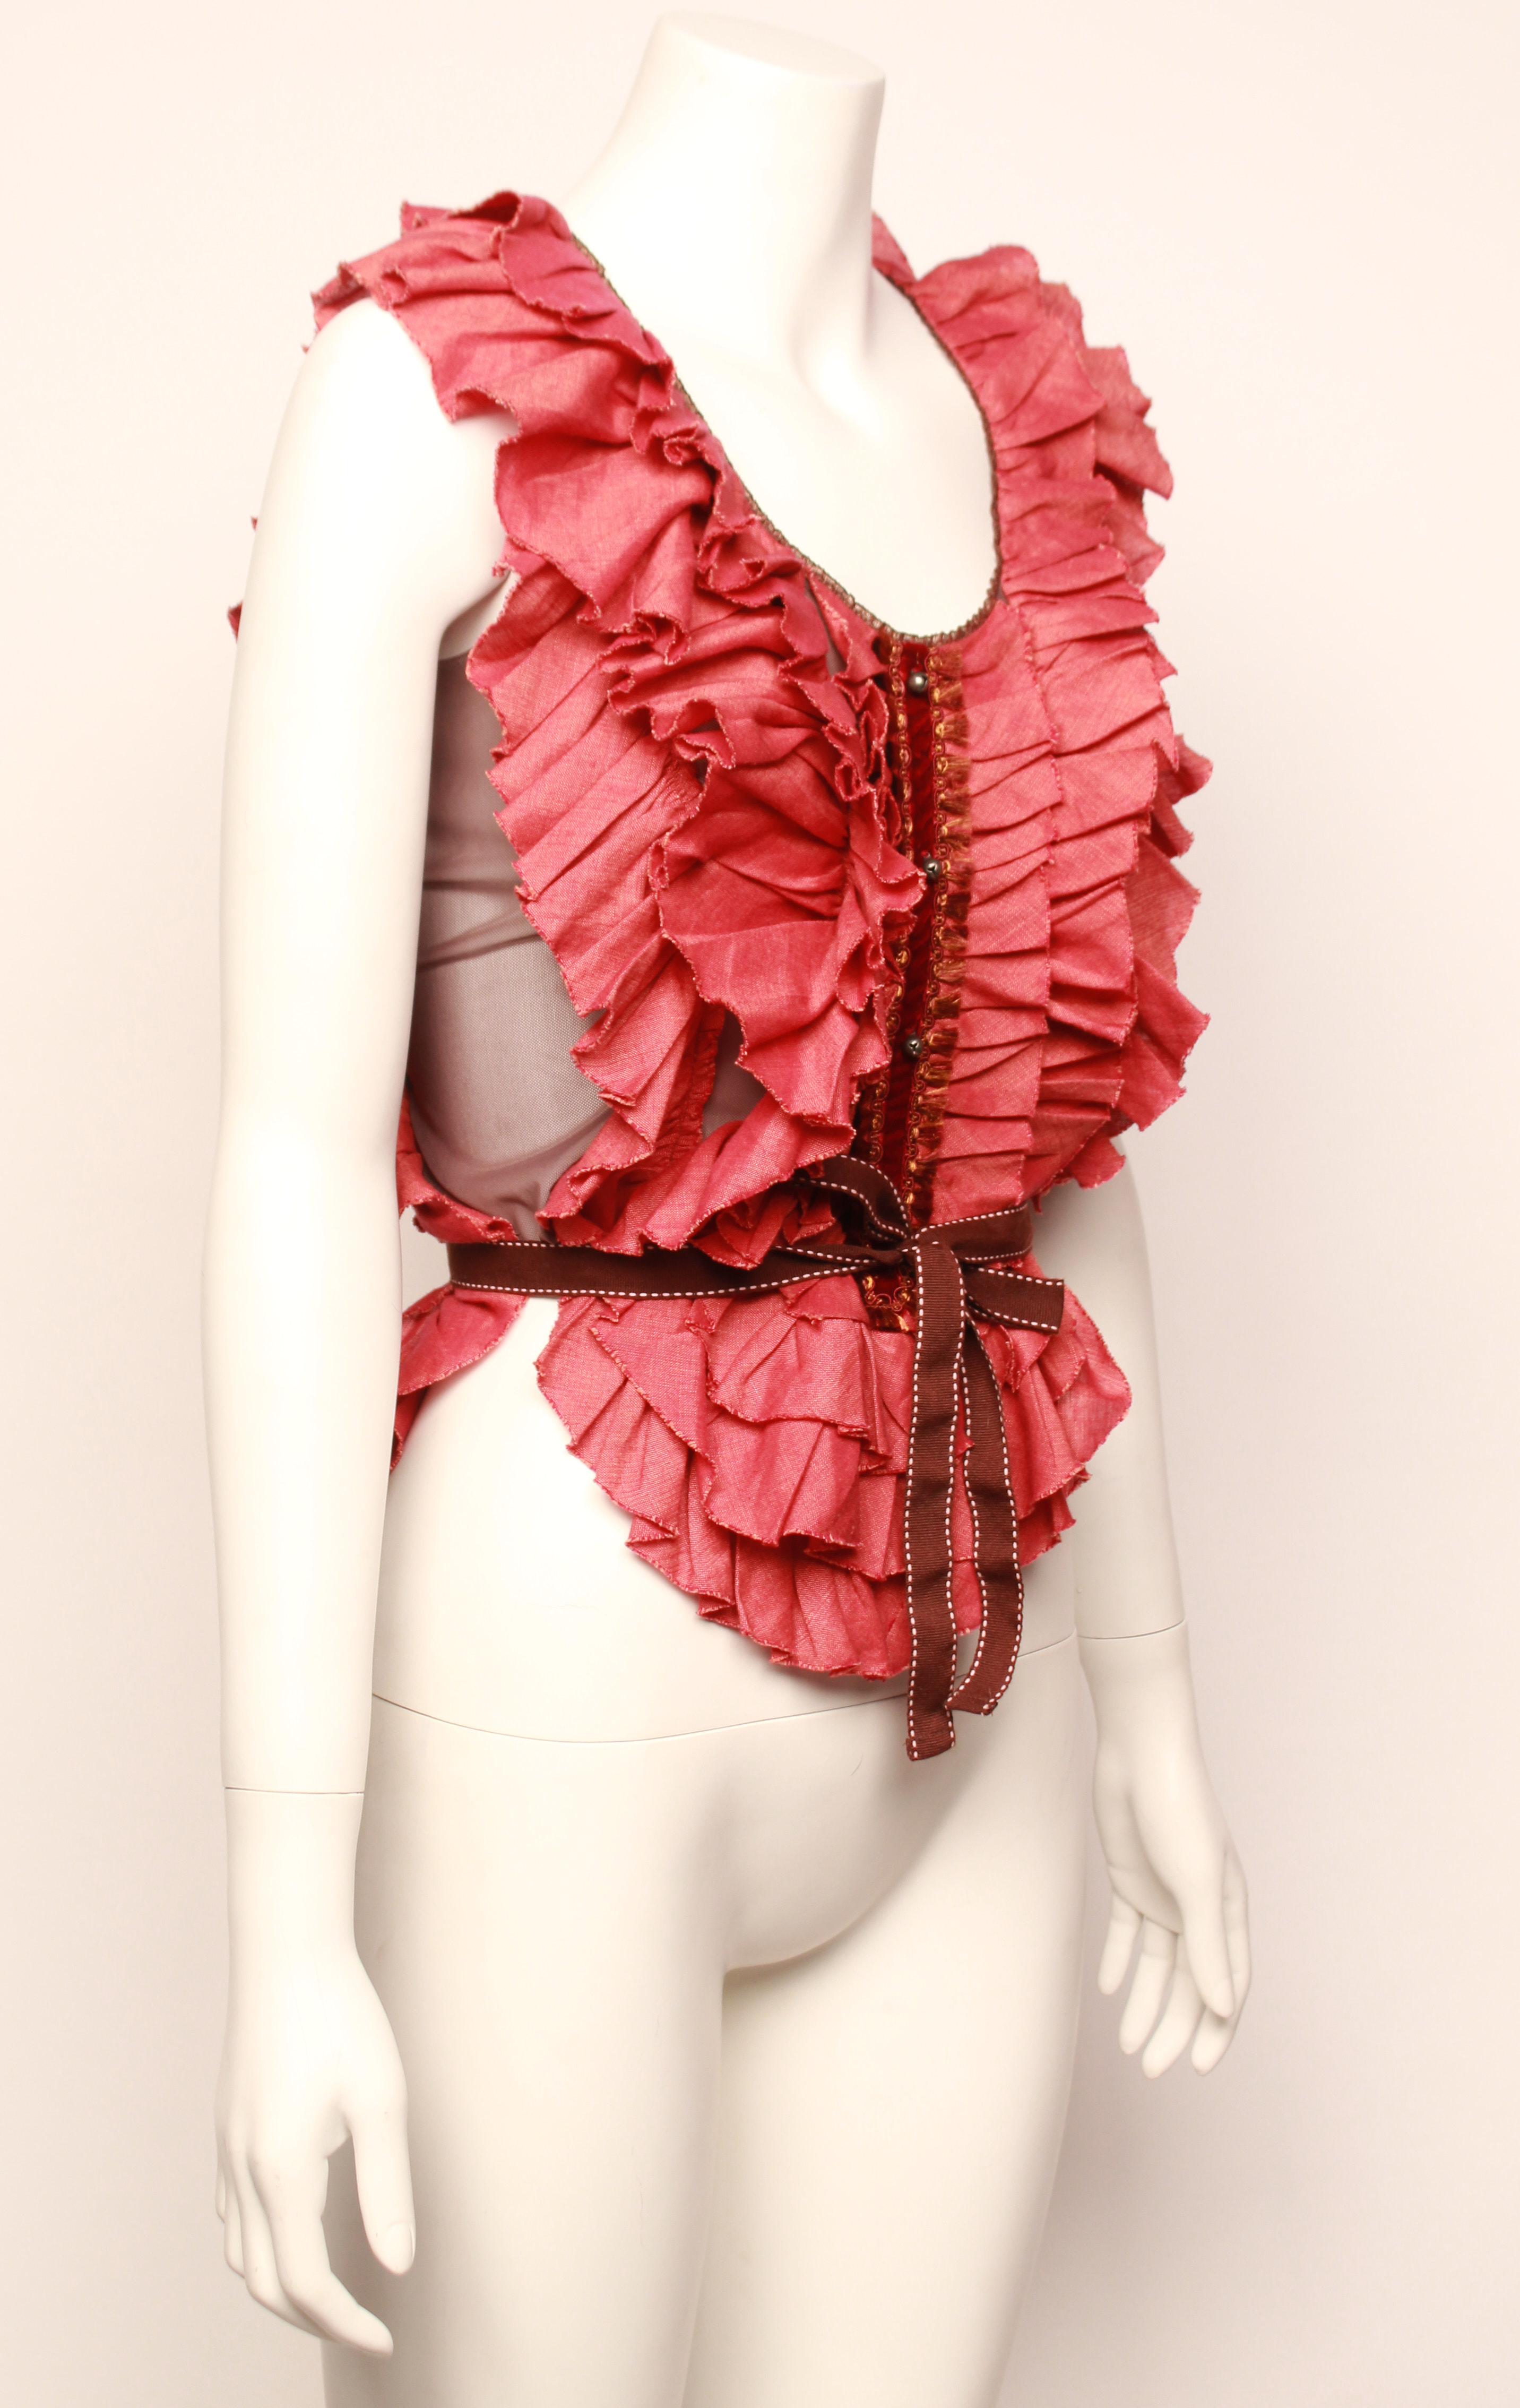 Theatre ruffled bib top with mocha coloured sheer stretch mesh top base with raw edged frills, velvet and braid centre front feature and cute decorative bells. 
Grosgrain ribbon waist tie. Size label has been removed but would fit across small to